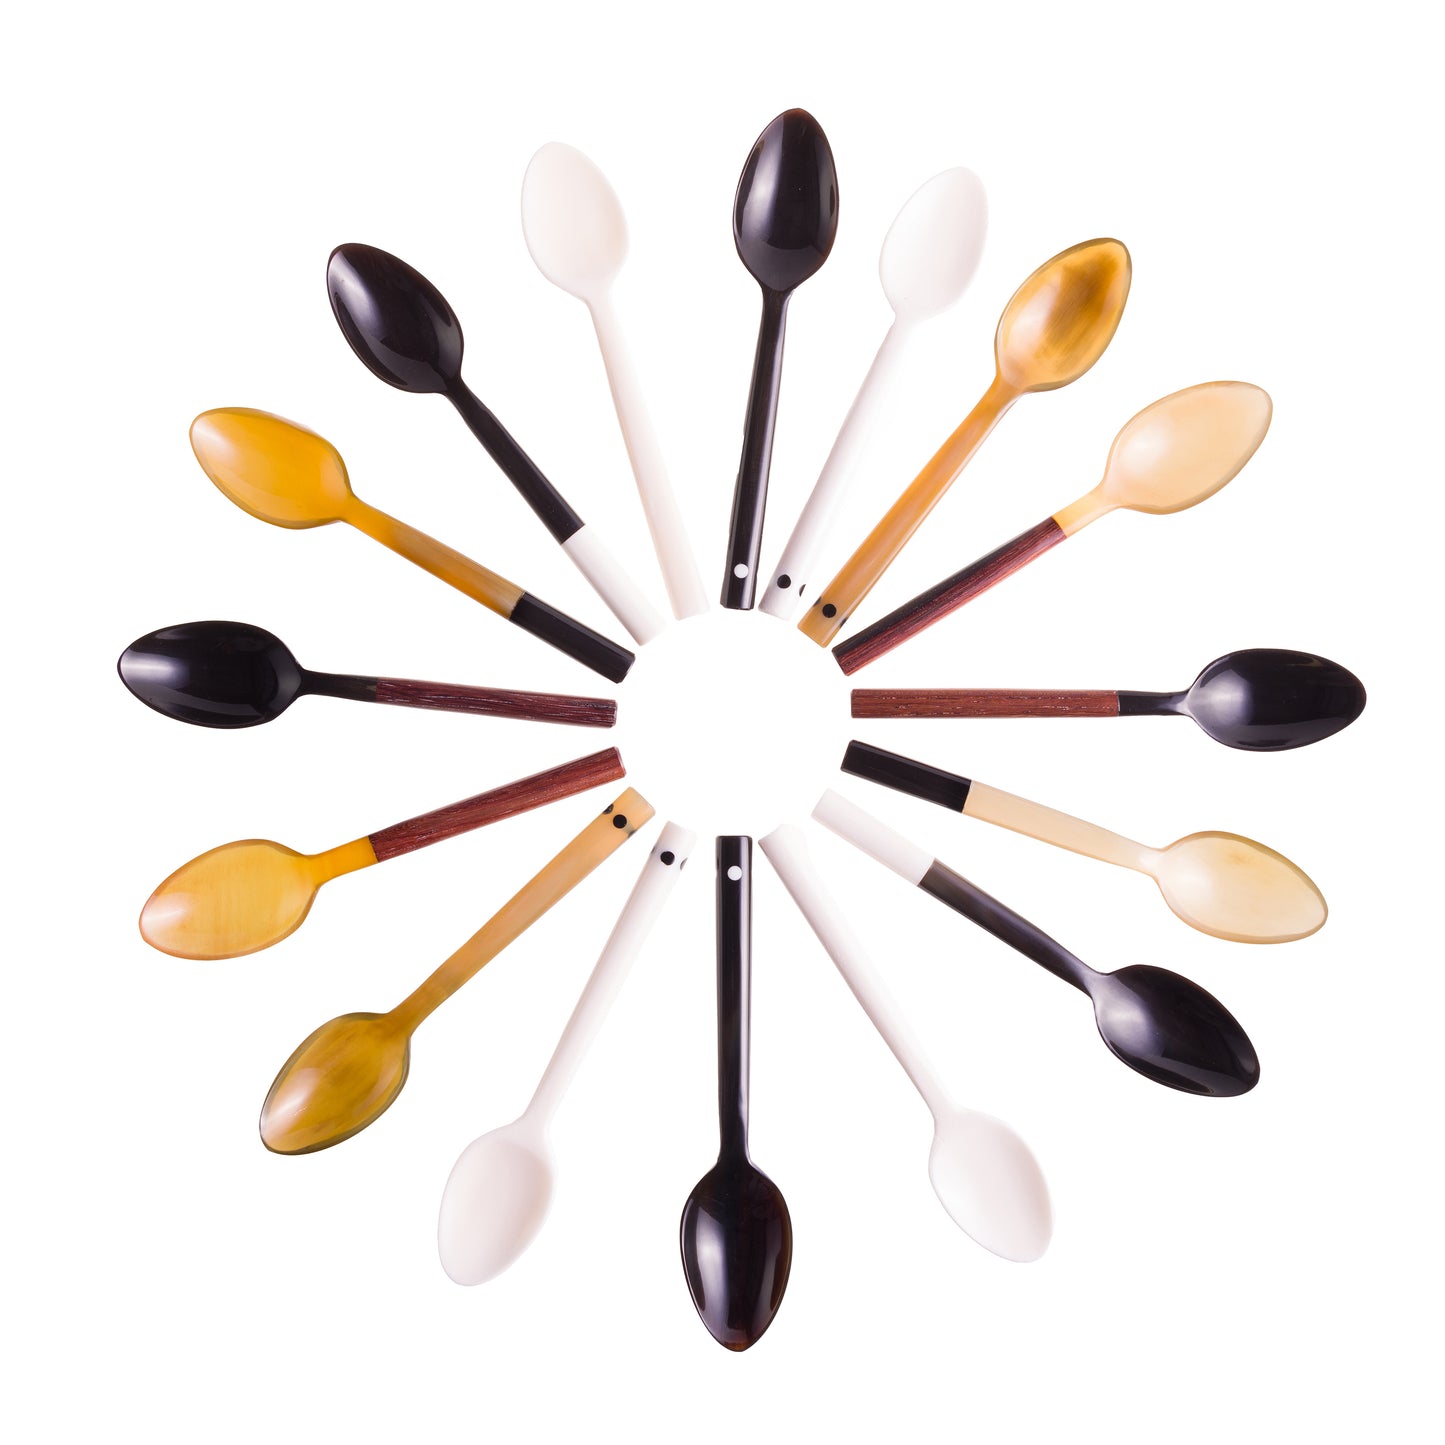 Horn Egg Spoon with Contrasting Tip